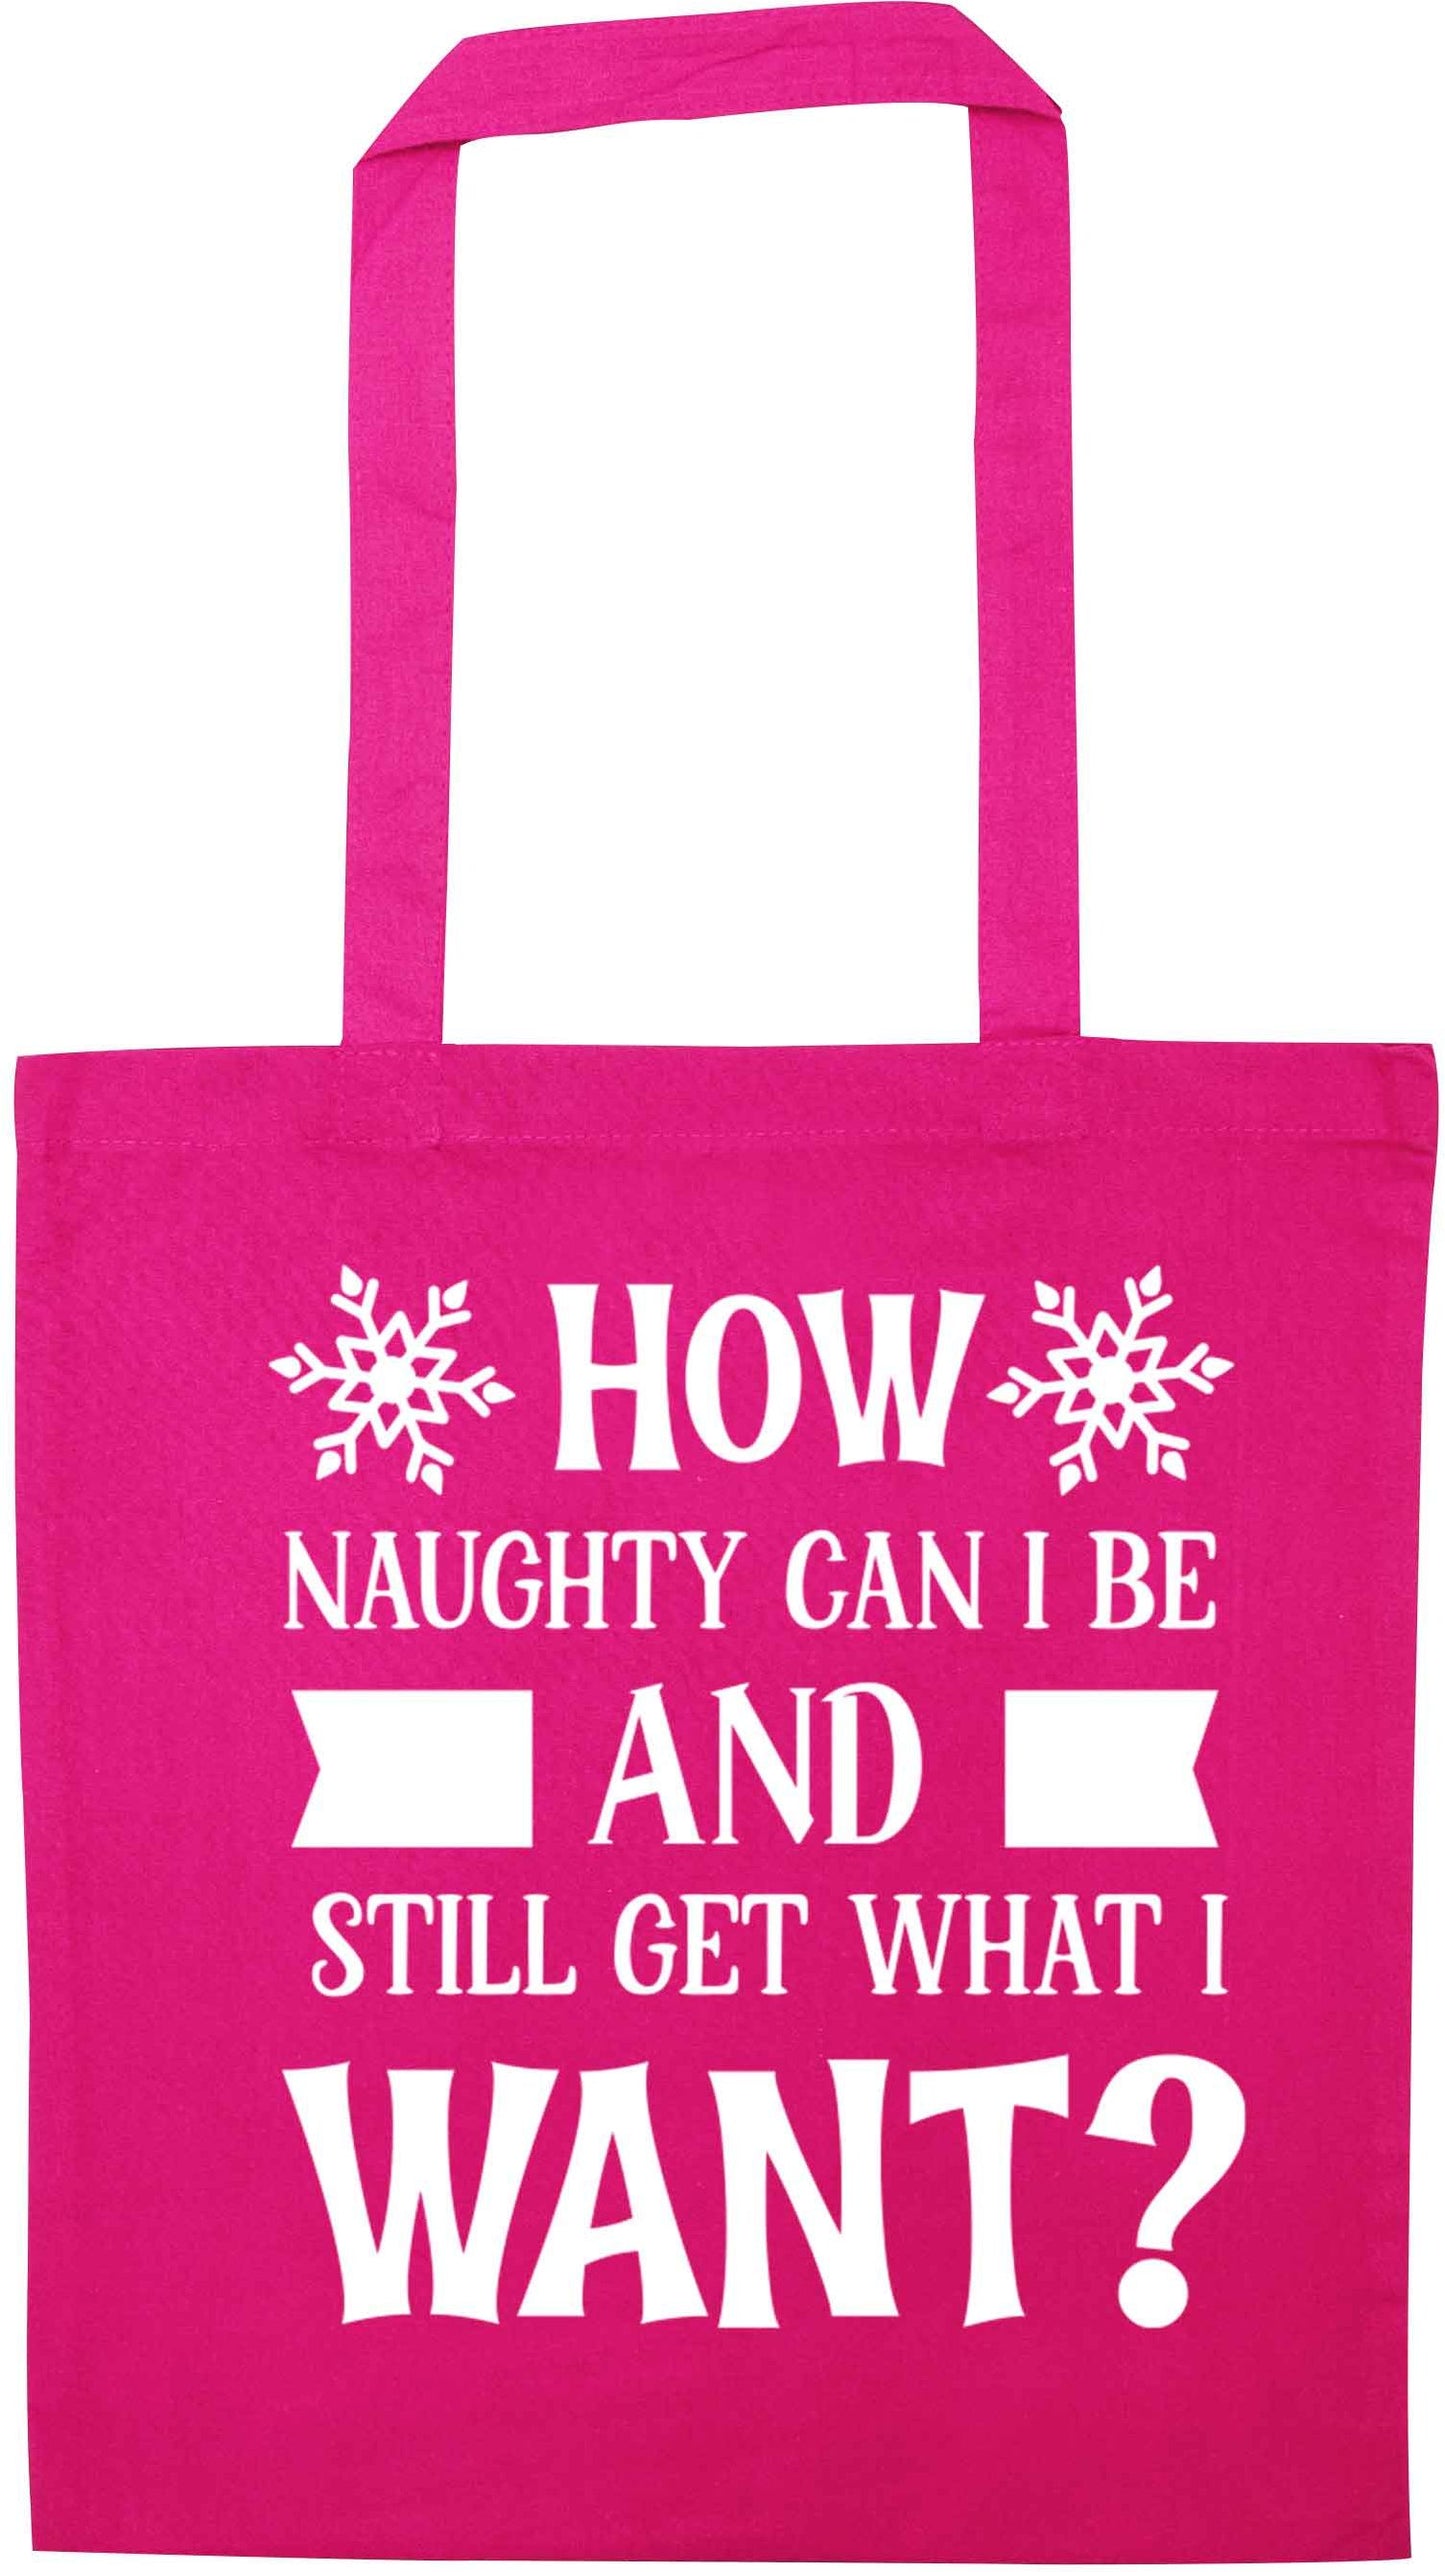 How naughty can I be and still get what I want? pink tote bag